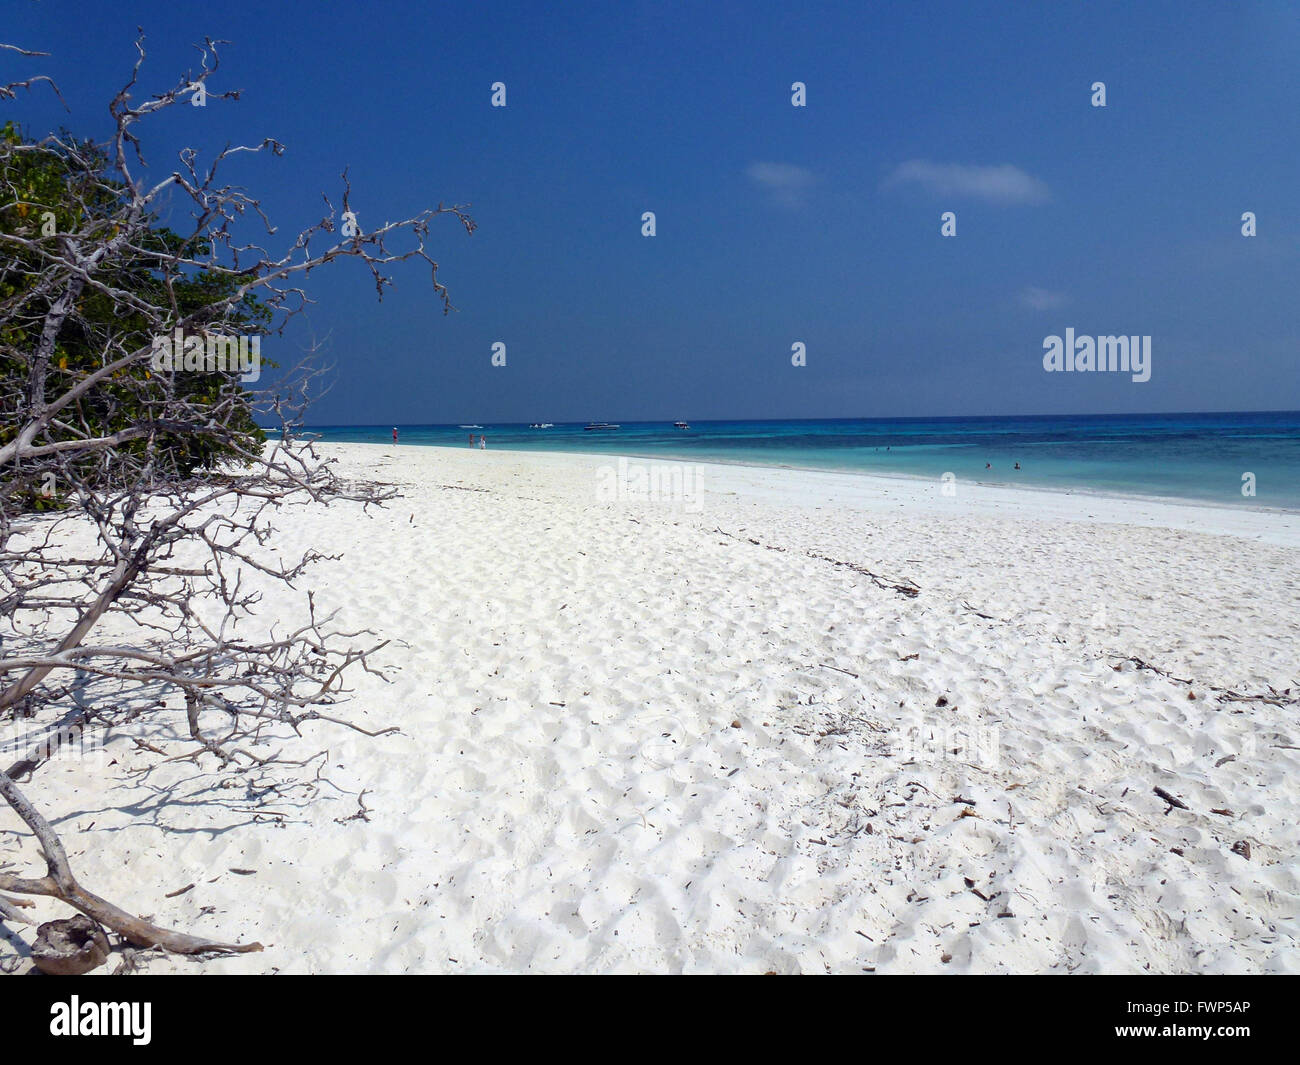 An empty beach on Koh Tachai island, Thailand, 14 March 2016. Koh Tachai is located outside of the Similan Islands and are the northernmost part of the national park of the same name. Photo: ALEXANDRA SCHULER/dpa - NO WIRE SERVICE - Stock Photo